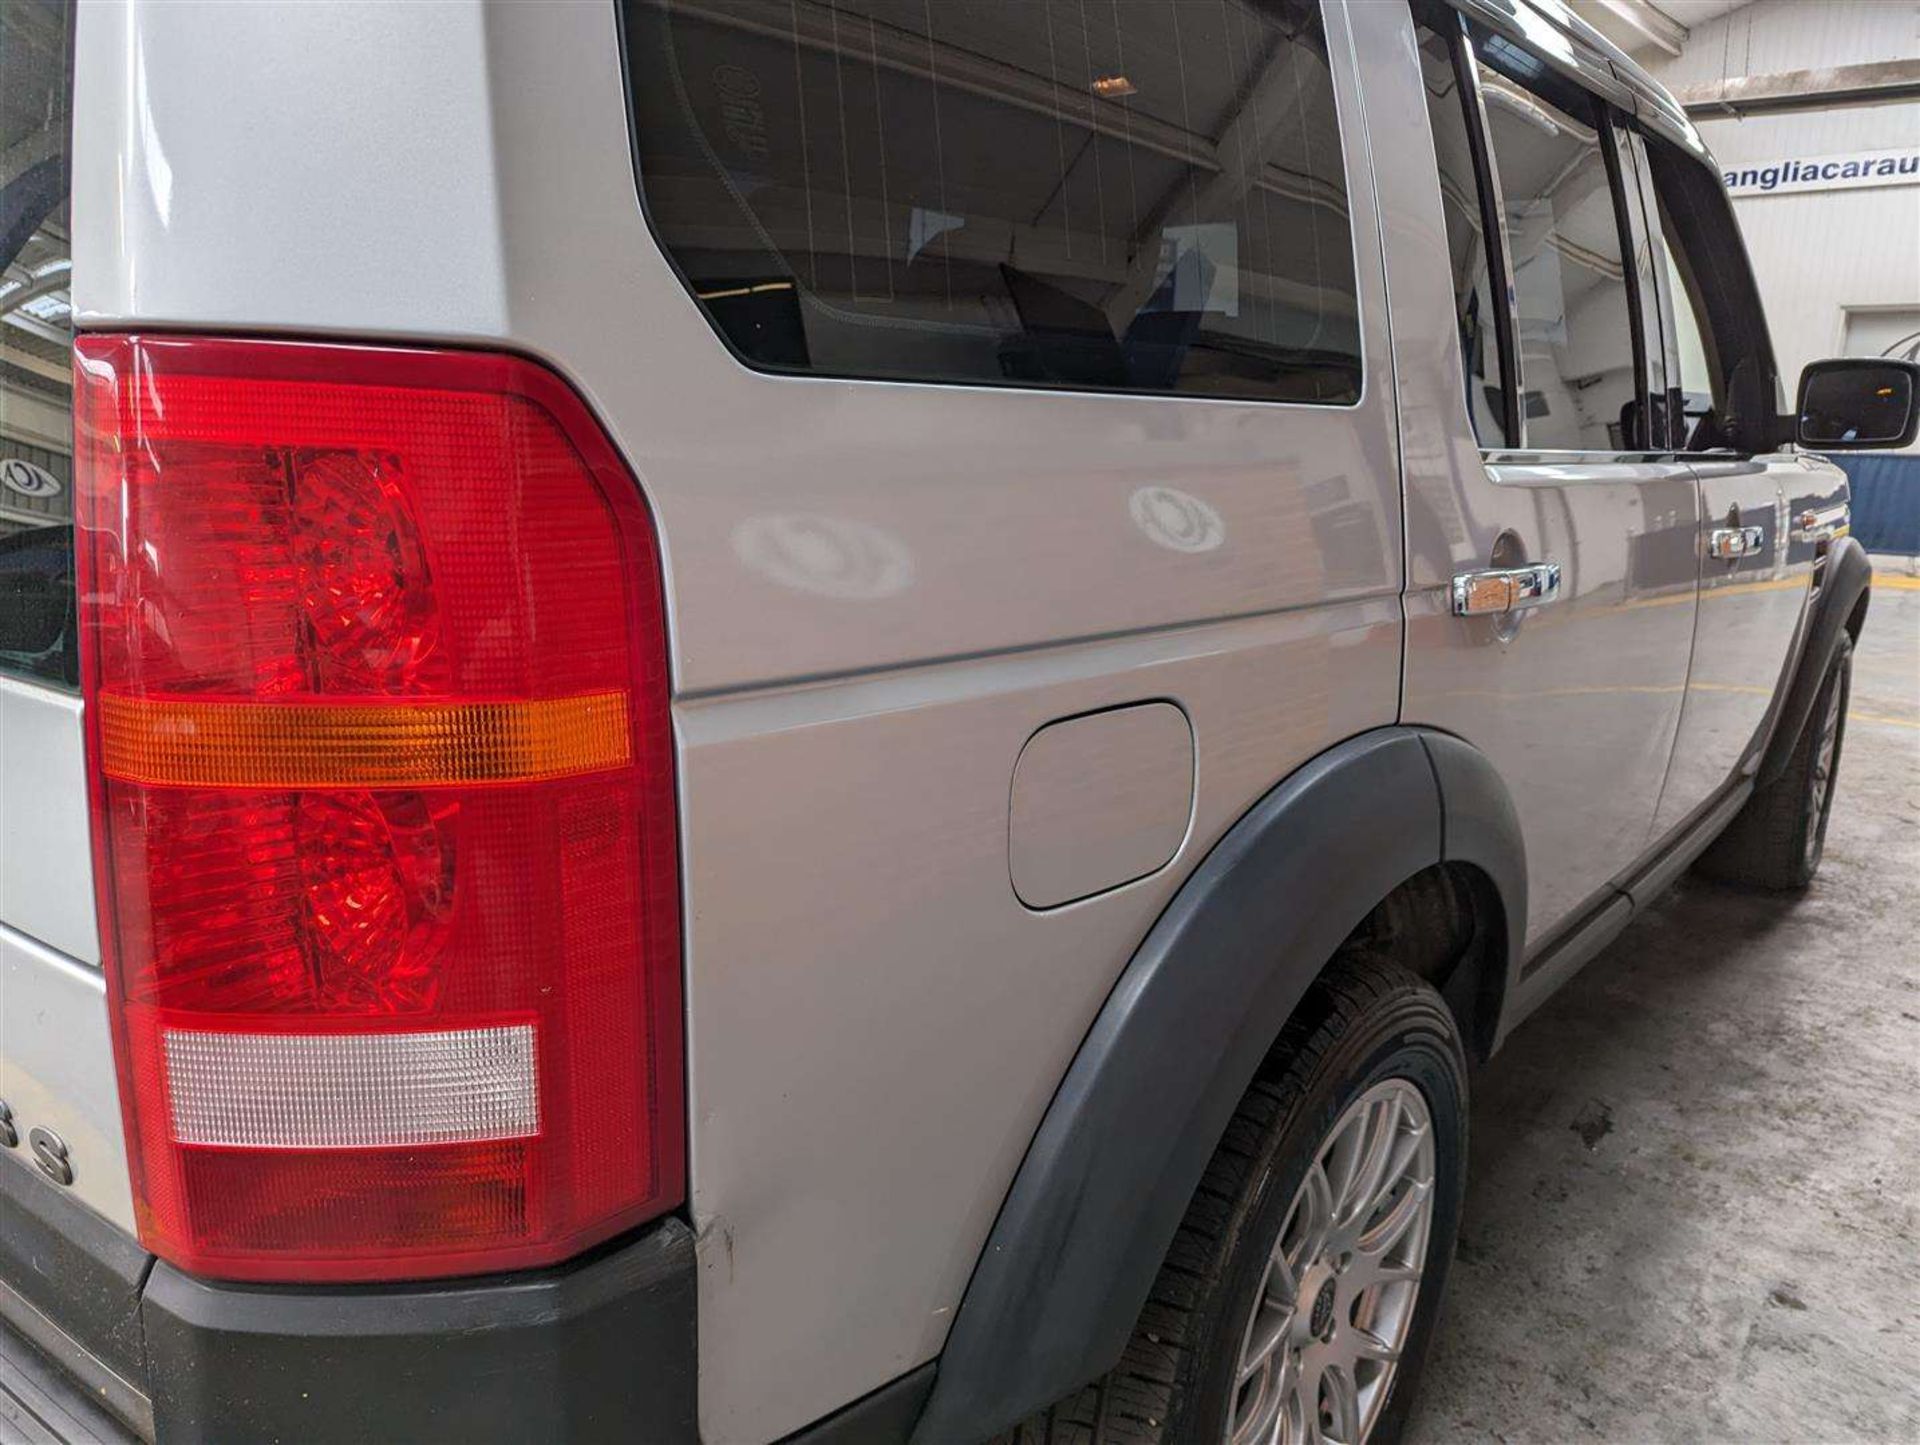 2005 LAND ROVER DISCOVERY 3 TDV6 S AUTO - Image 8 of 30